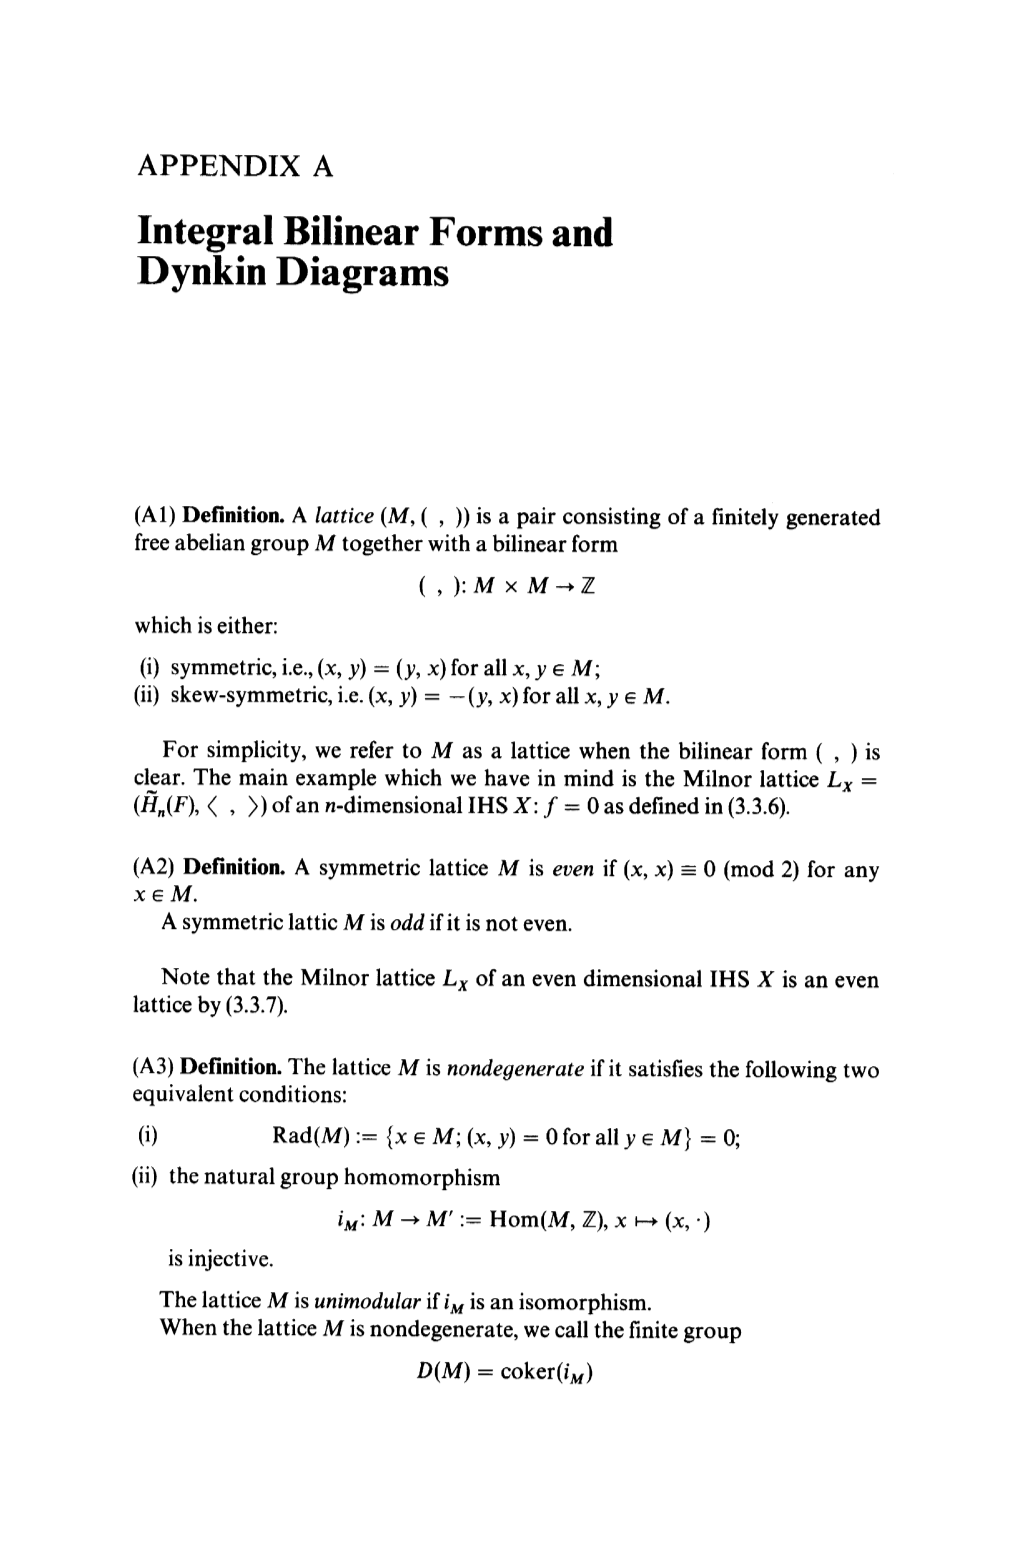 Integral Bilinear Forms and Dynkin Diagrams